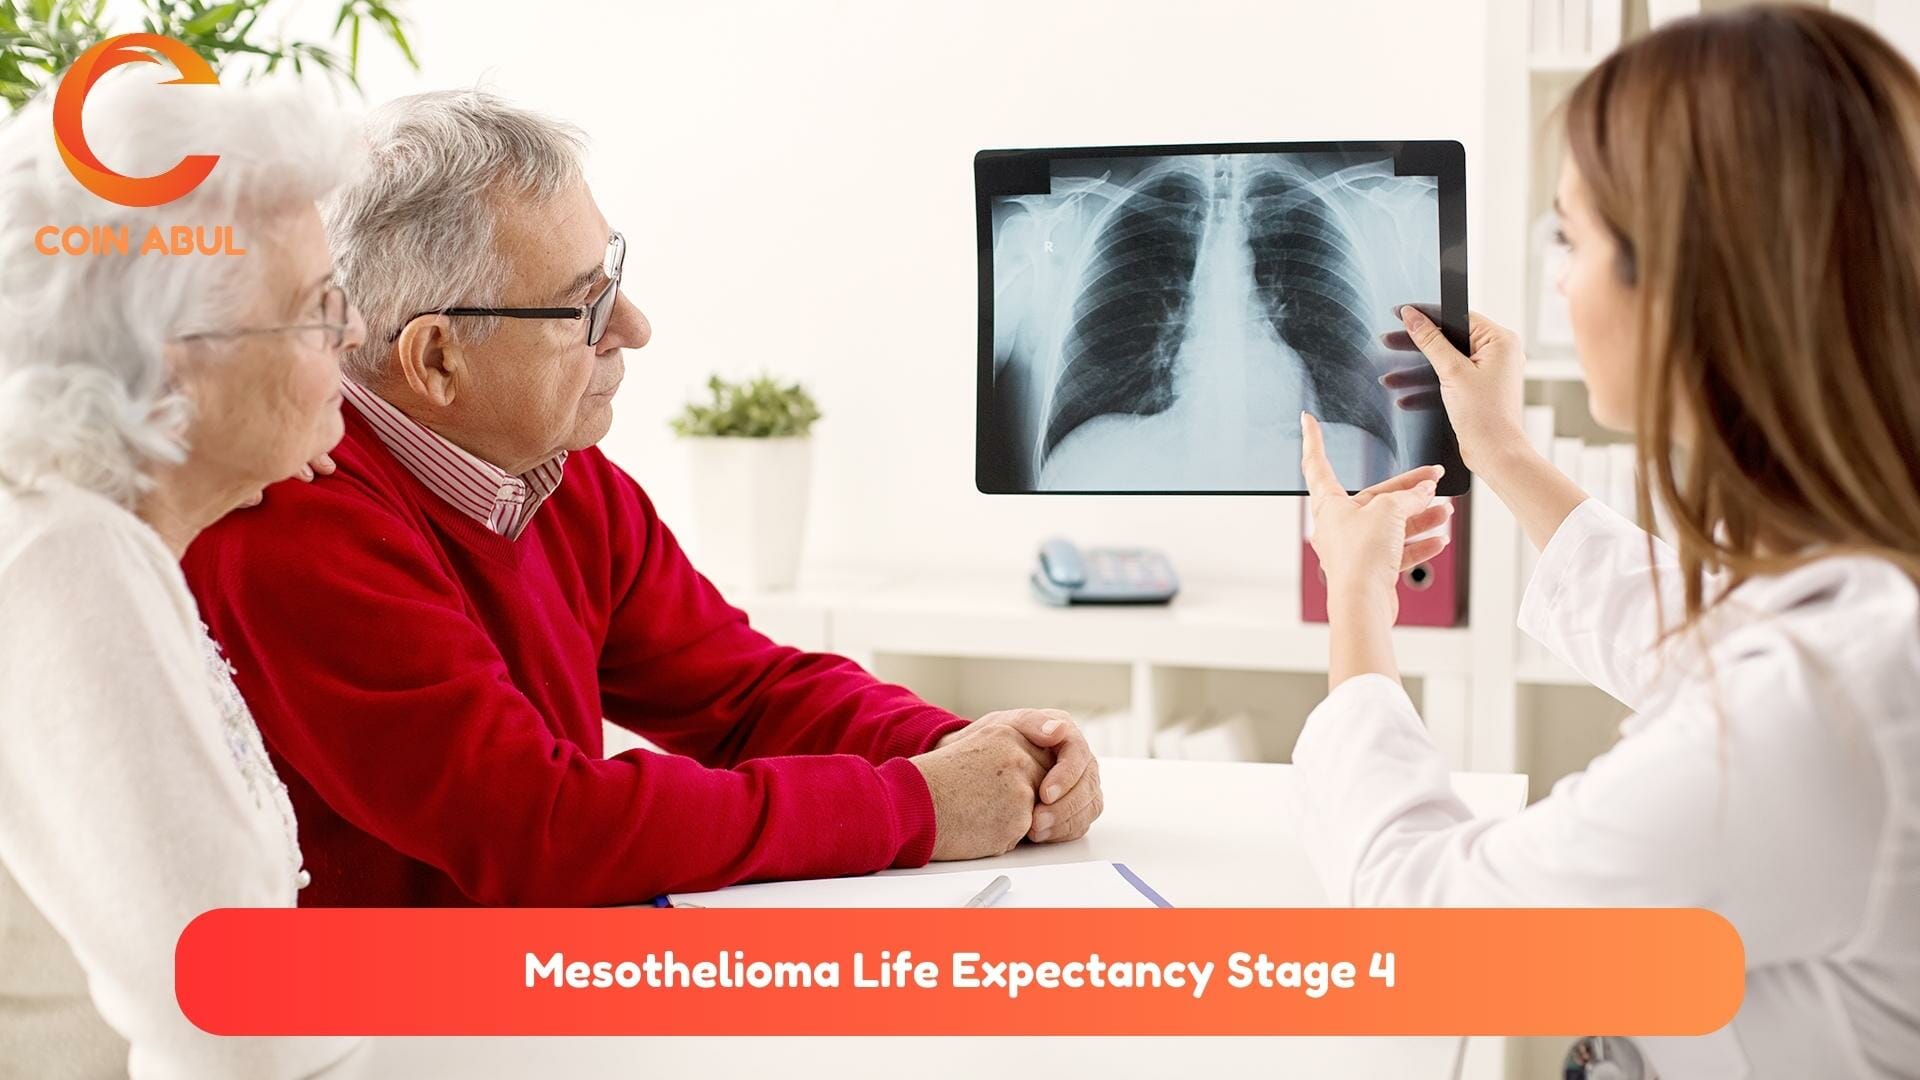 Mesothelioma Life Expectancy Stage 4